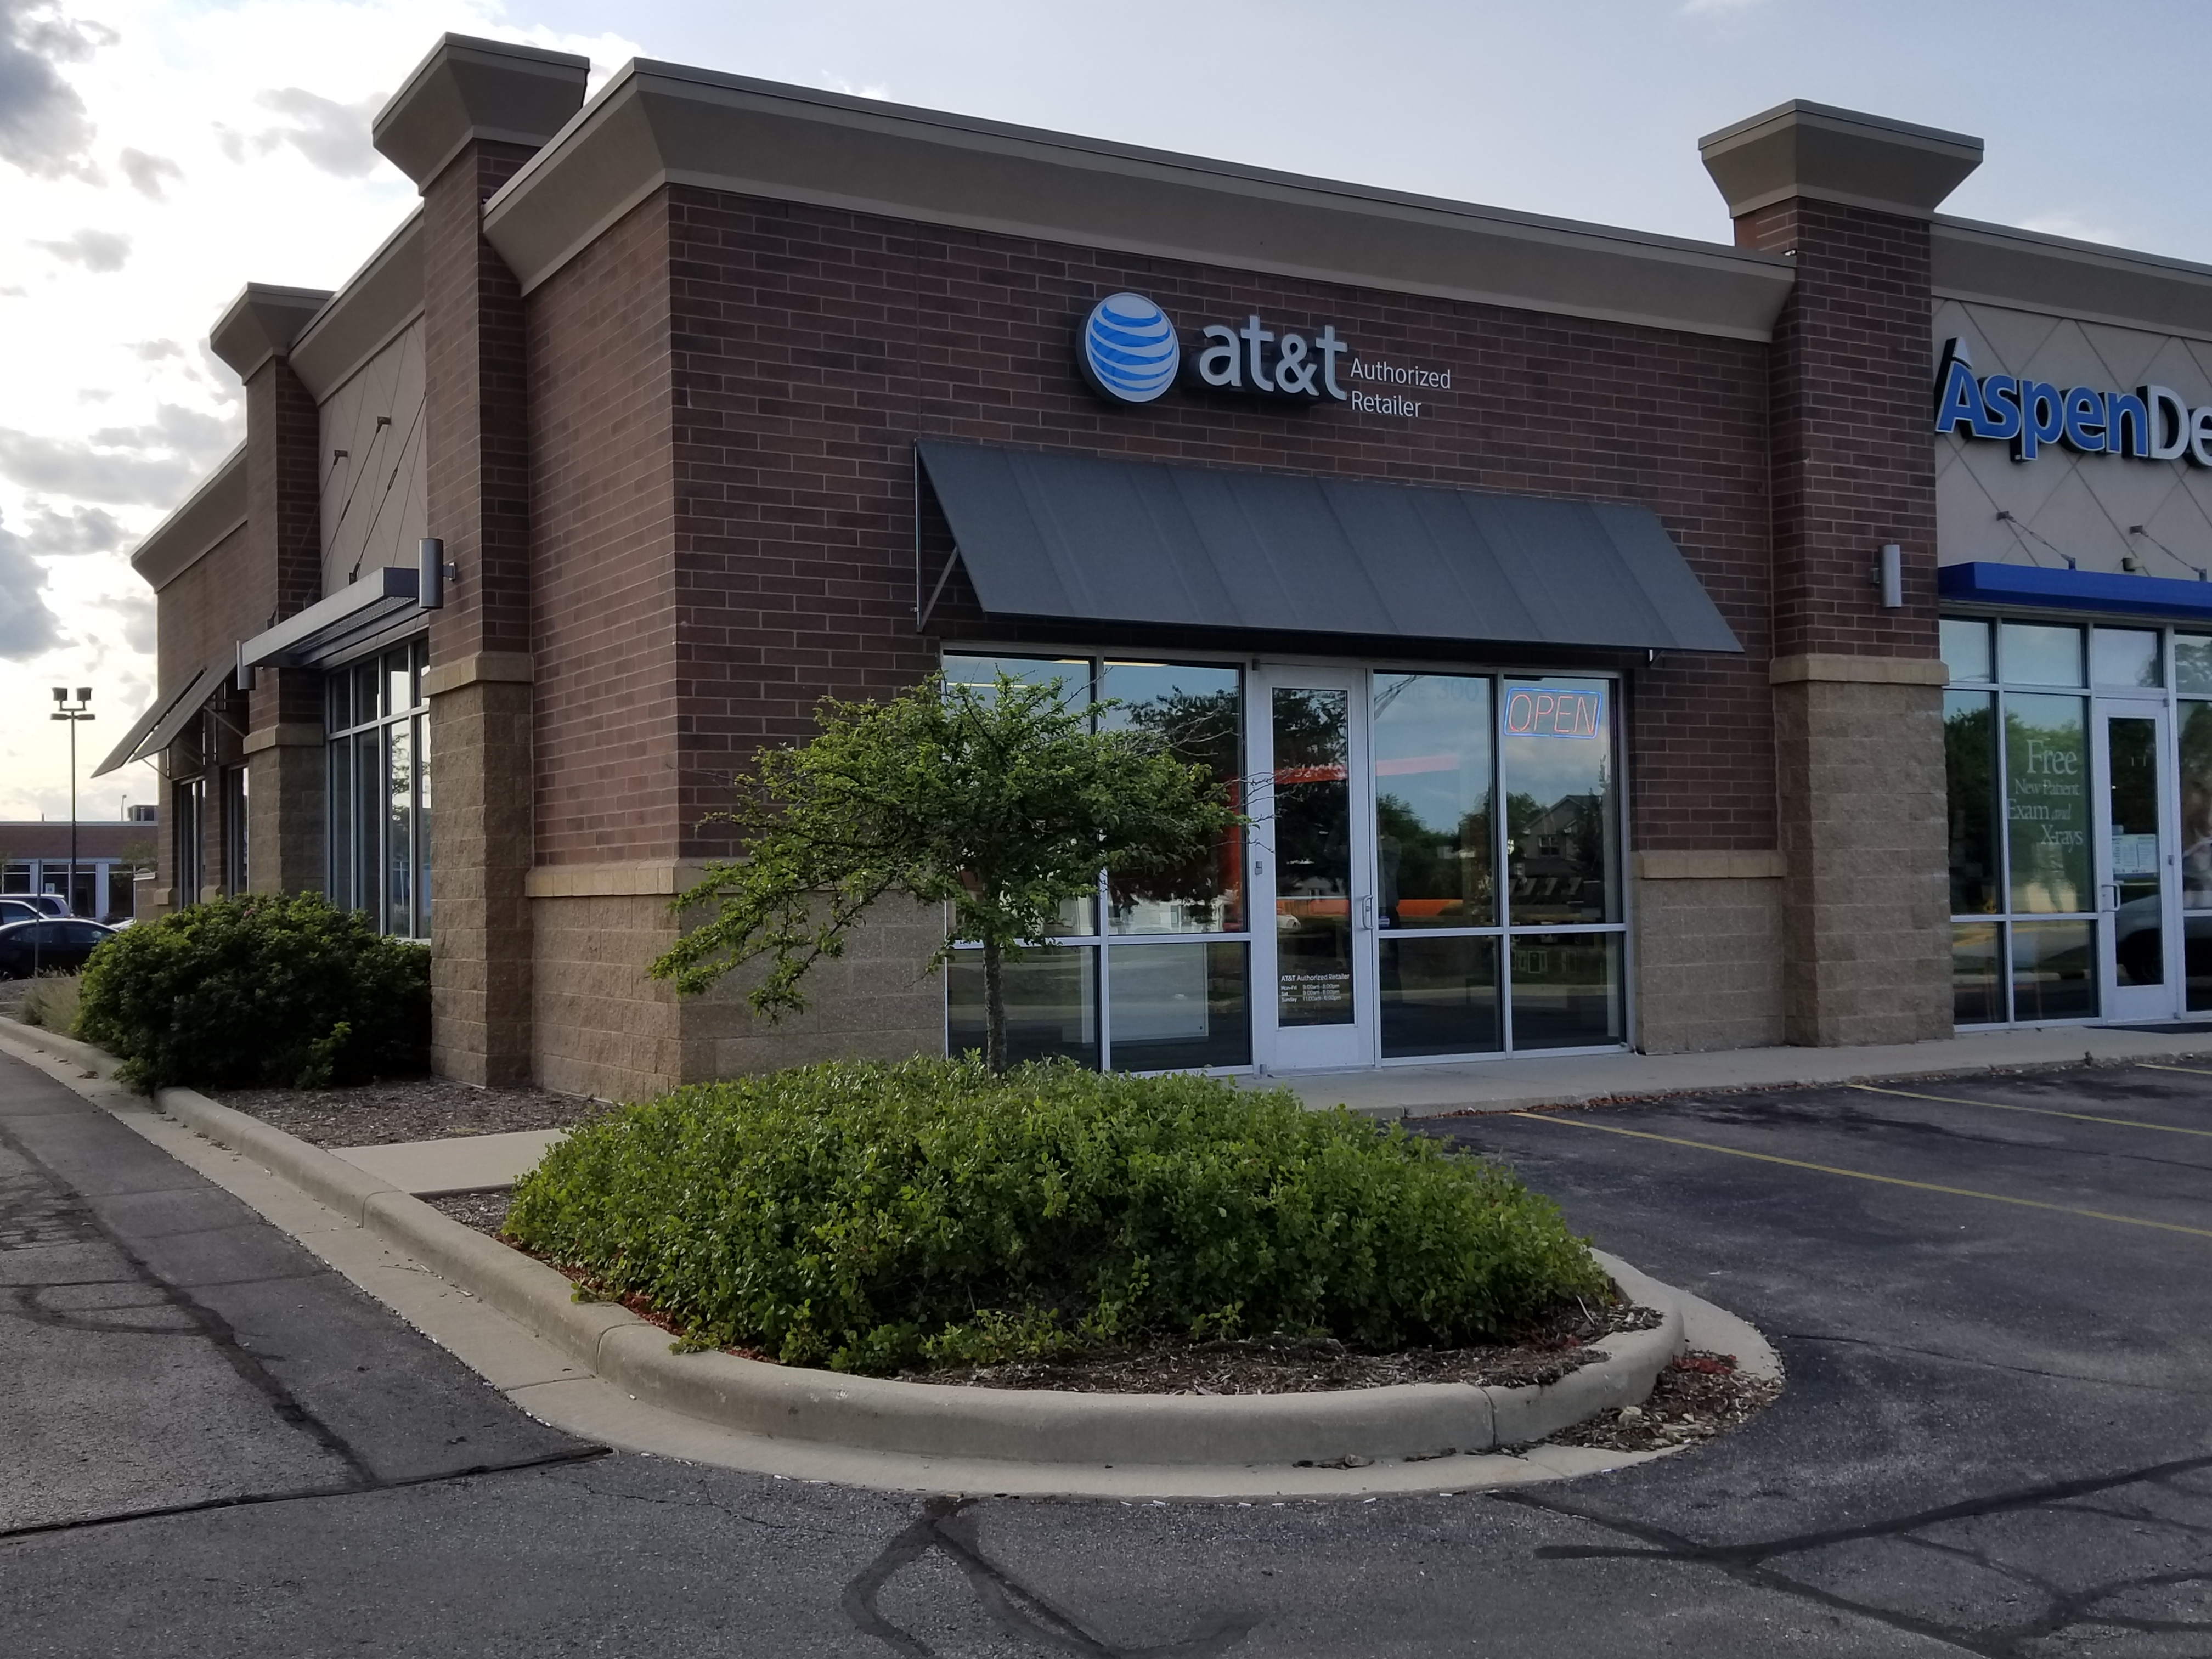 AT&T Store Coupons near me in Oak Creek, WI 53154 | 8coupons